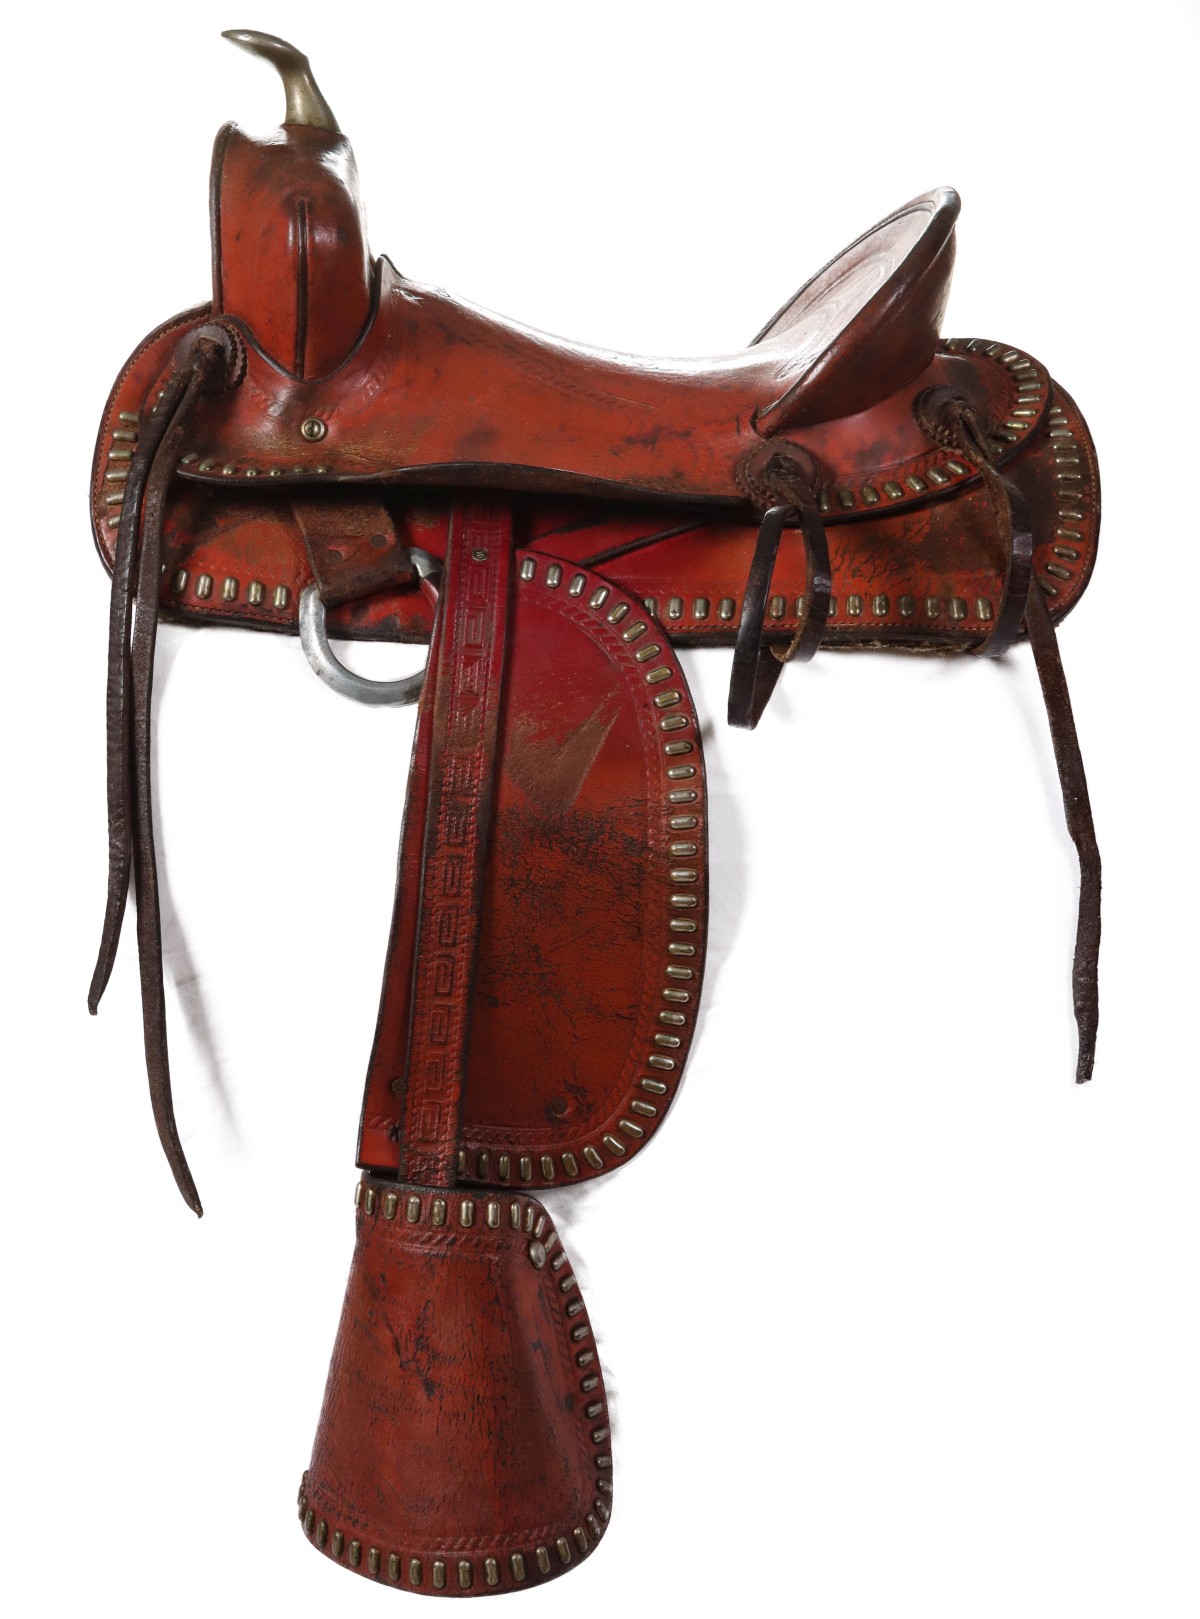 A CHARLES P. SHIPLEY YOUTH SADDLE WITH NICKEL STUDS